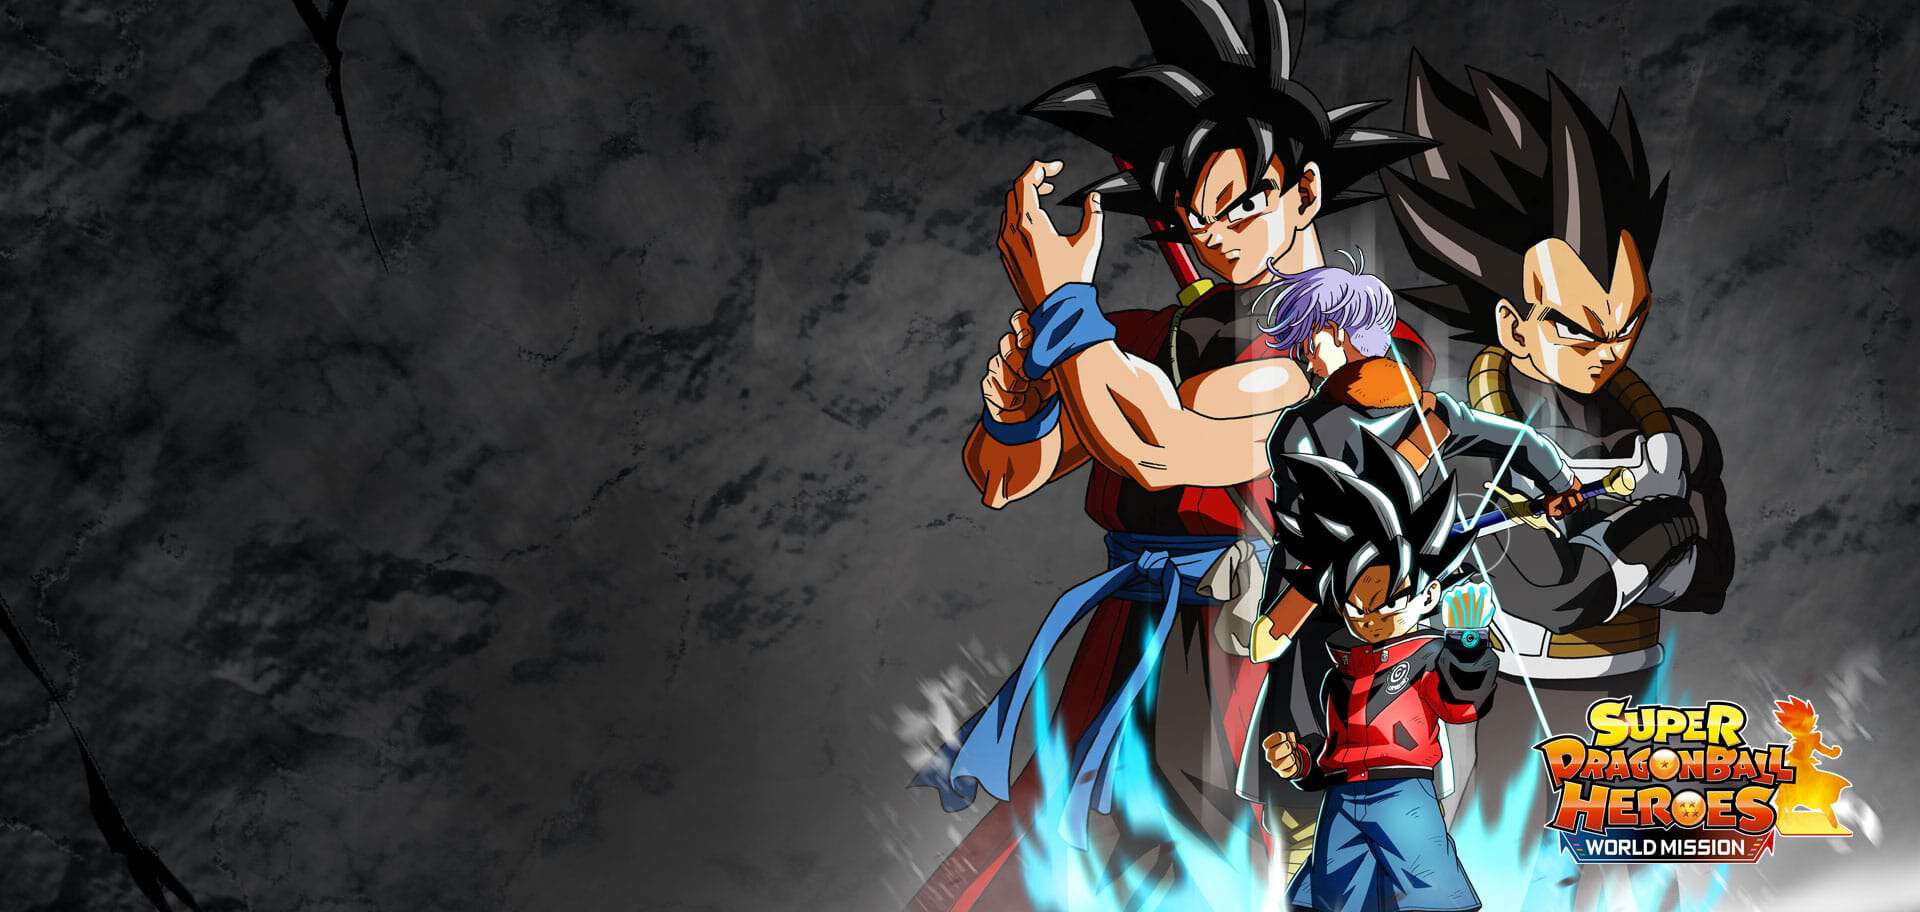 Dragon Ball Heroes Episode 20 and Season 2 Release Date